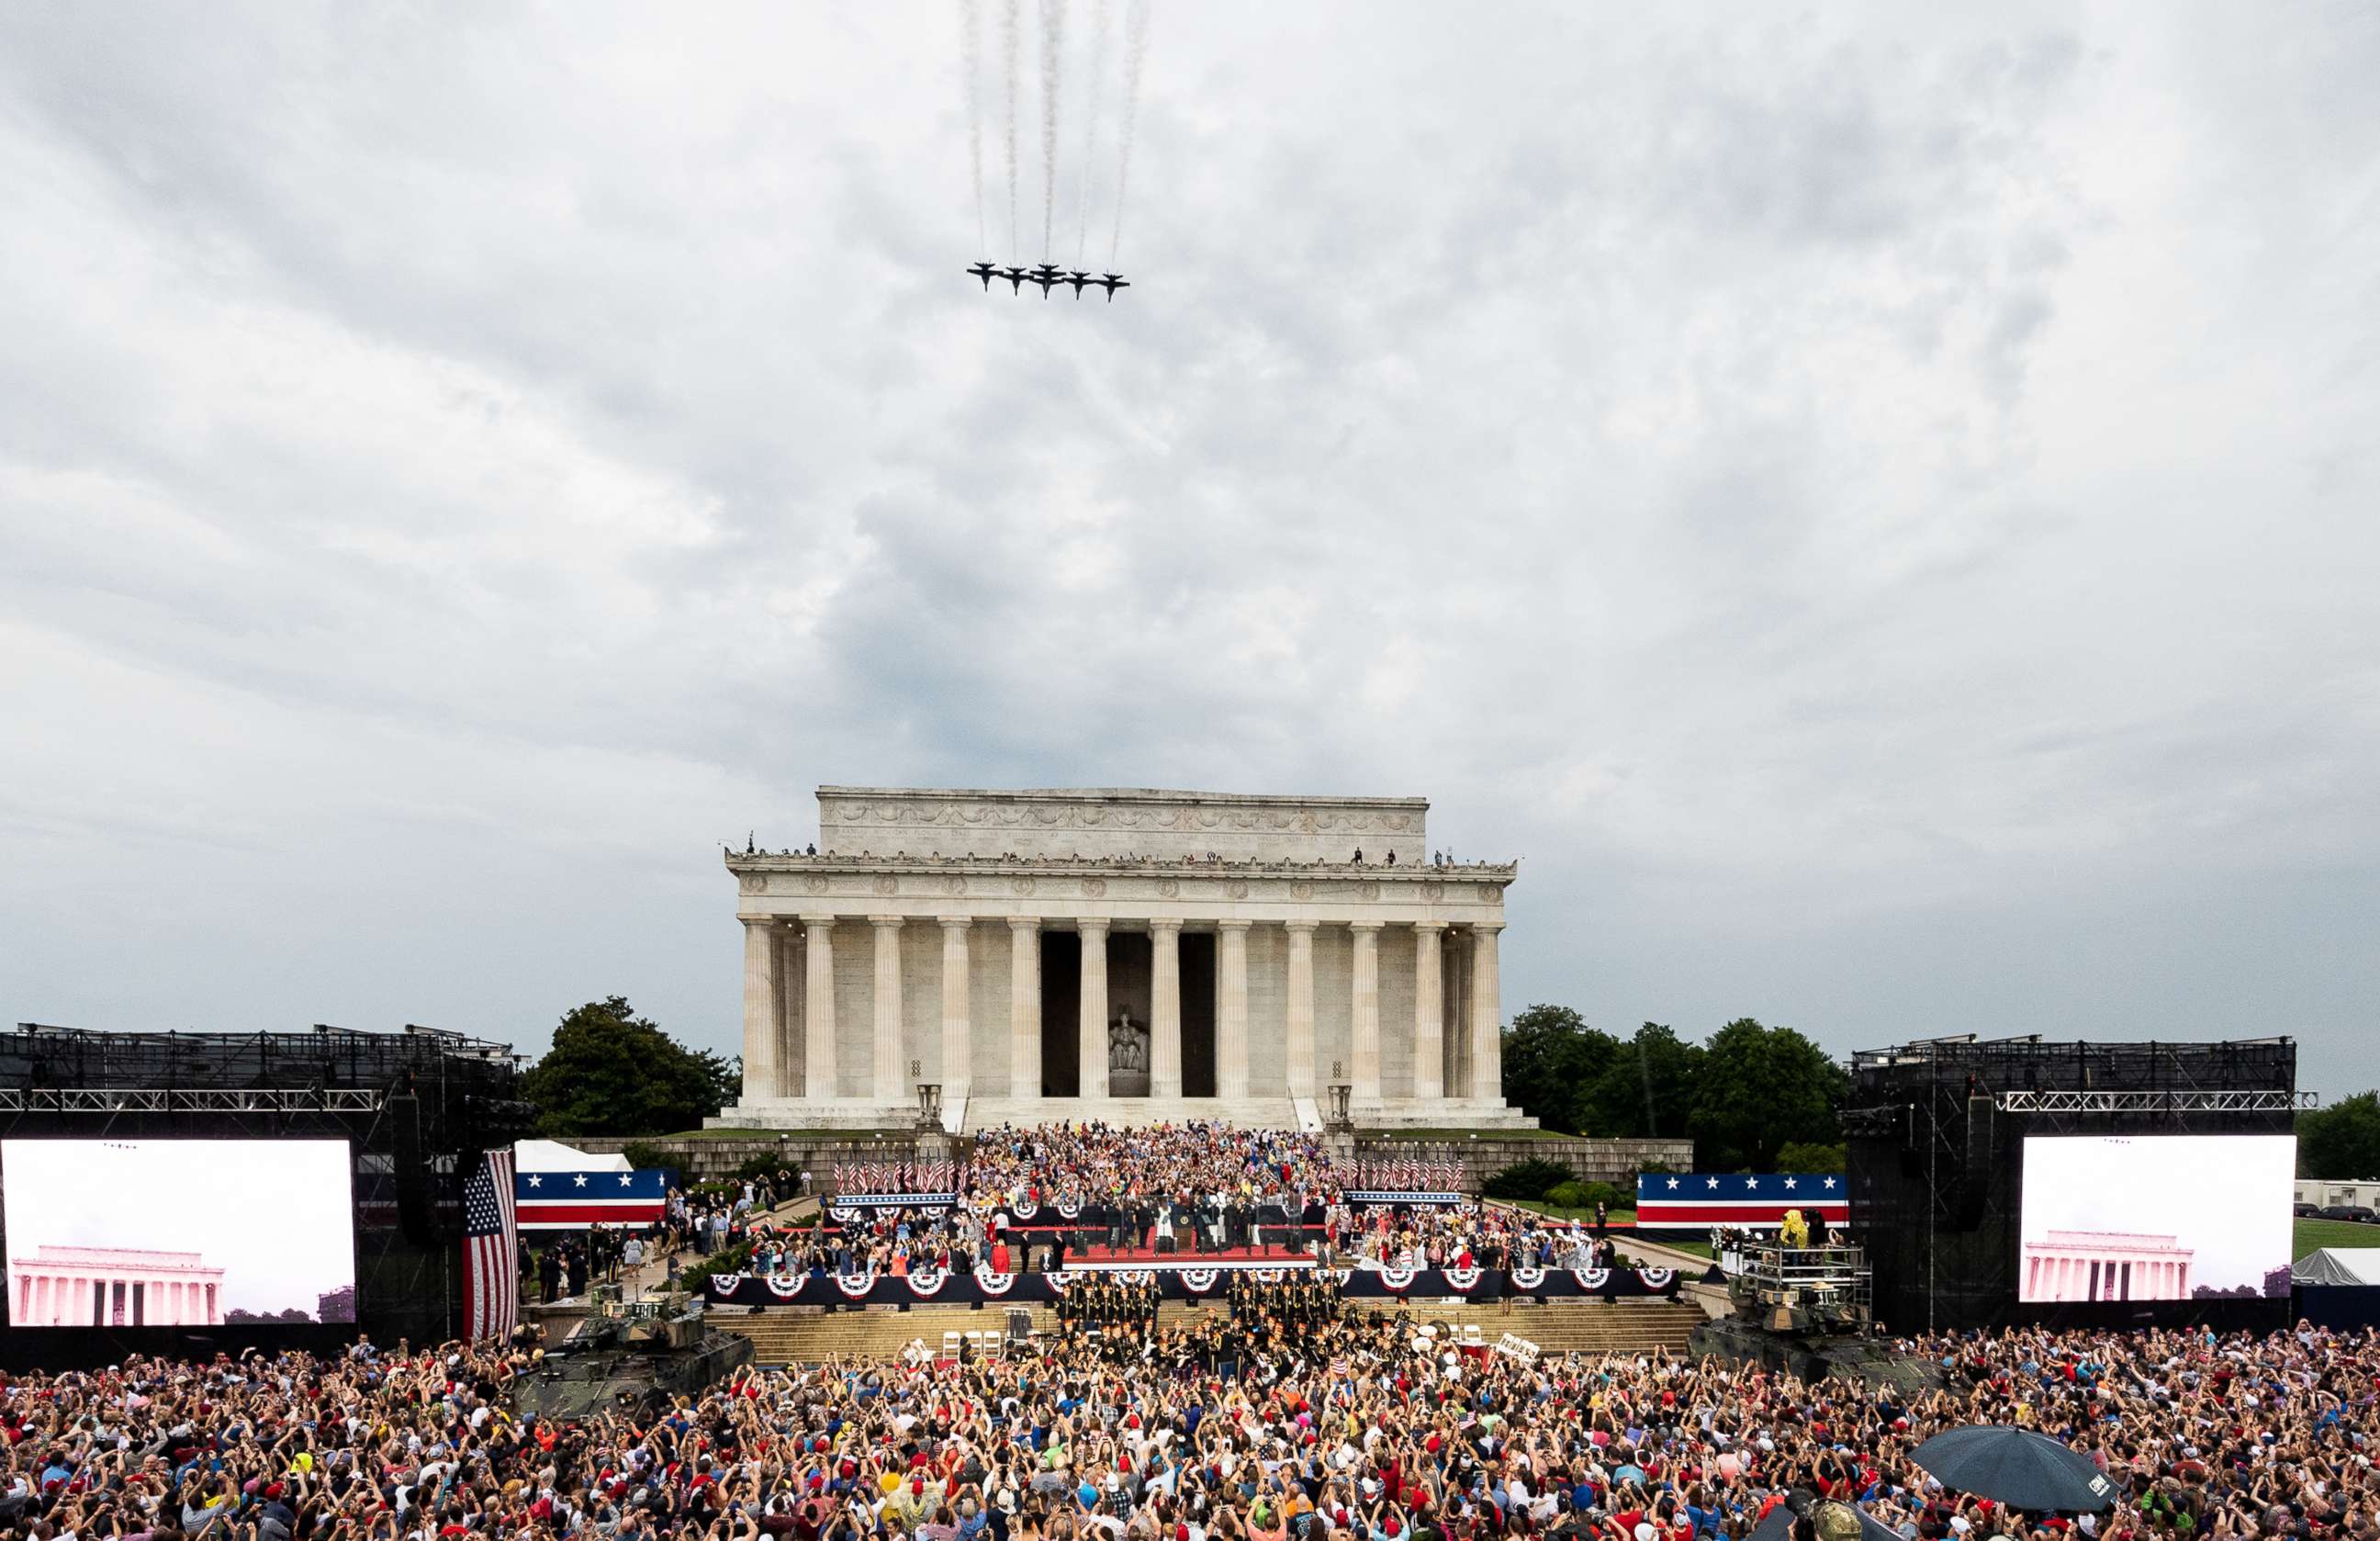 PHOTO: President Donald Trump speaks at the National Mall as a military flyover takes place during the Salute To America event on July 4, 2019 in Washington.